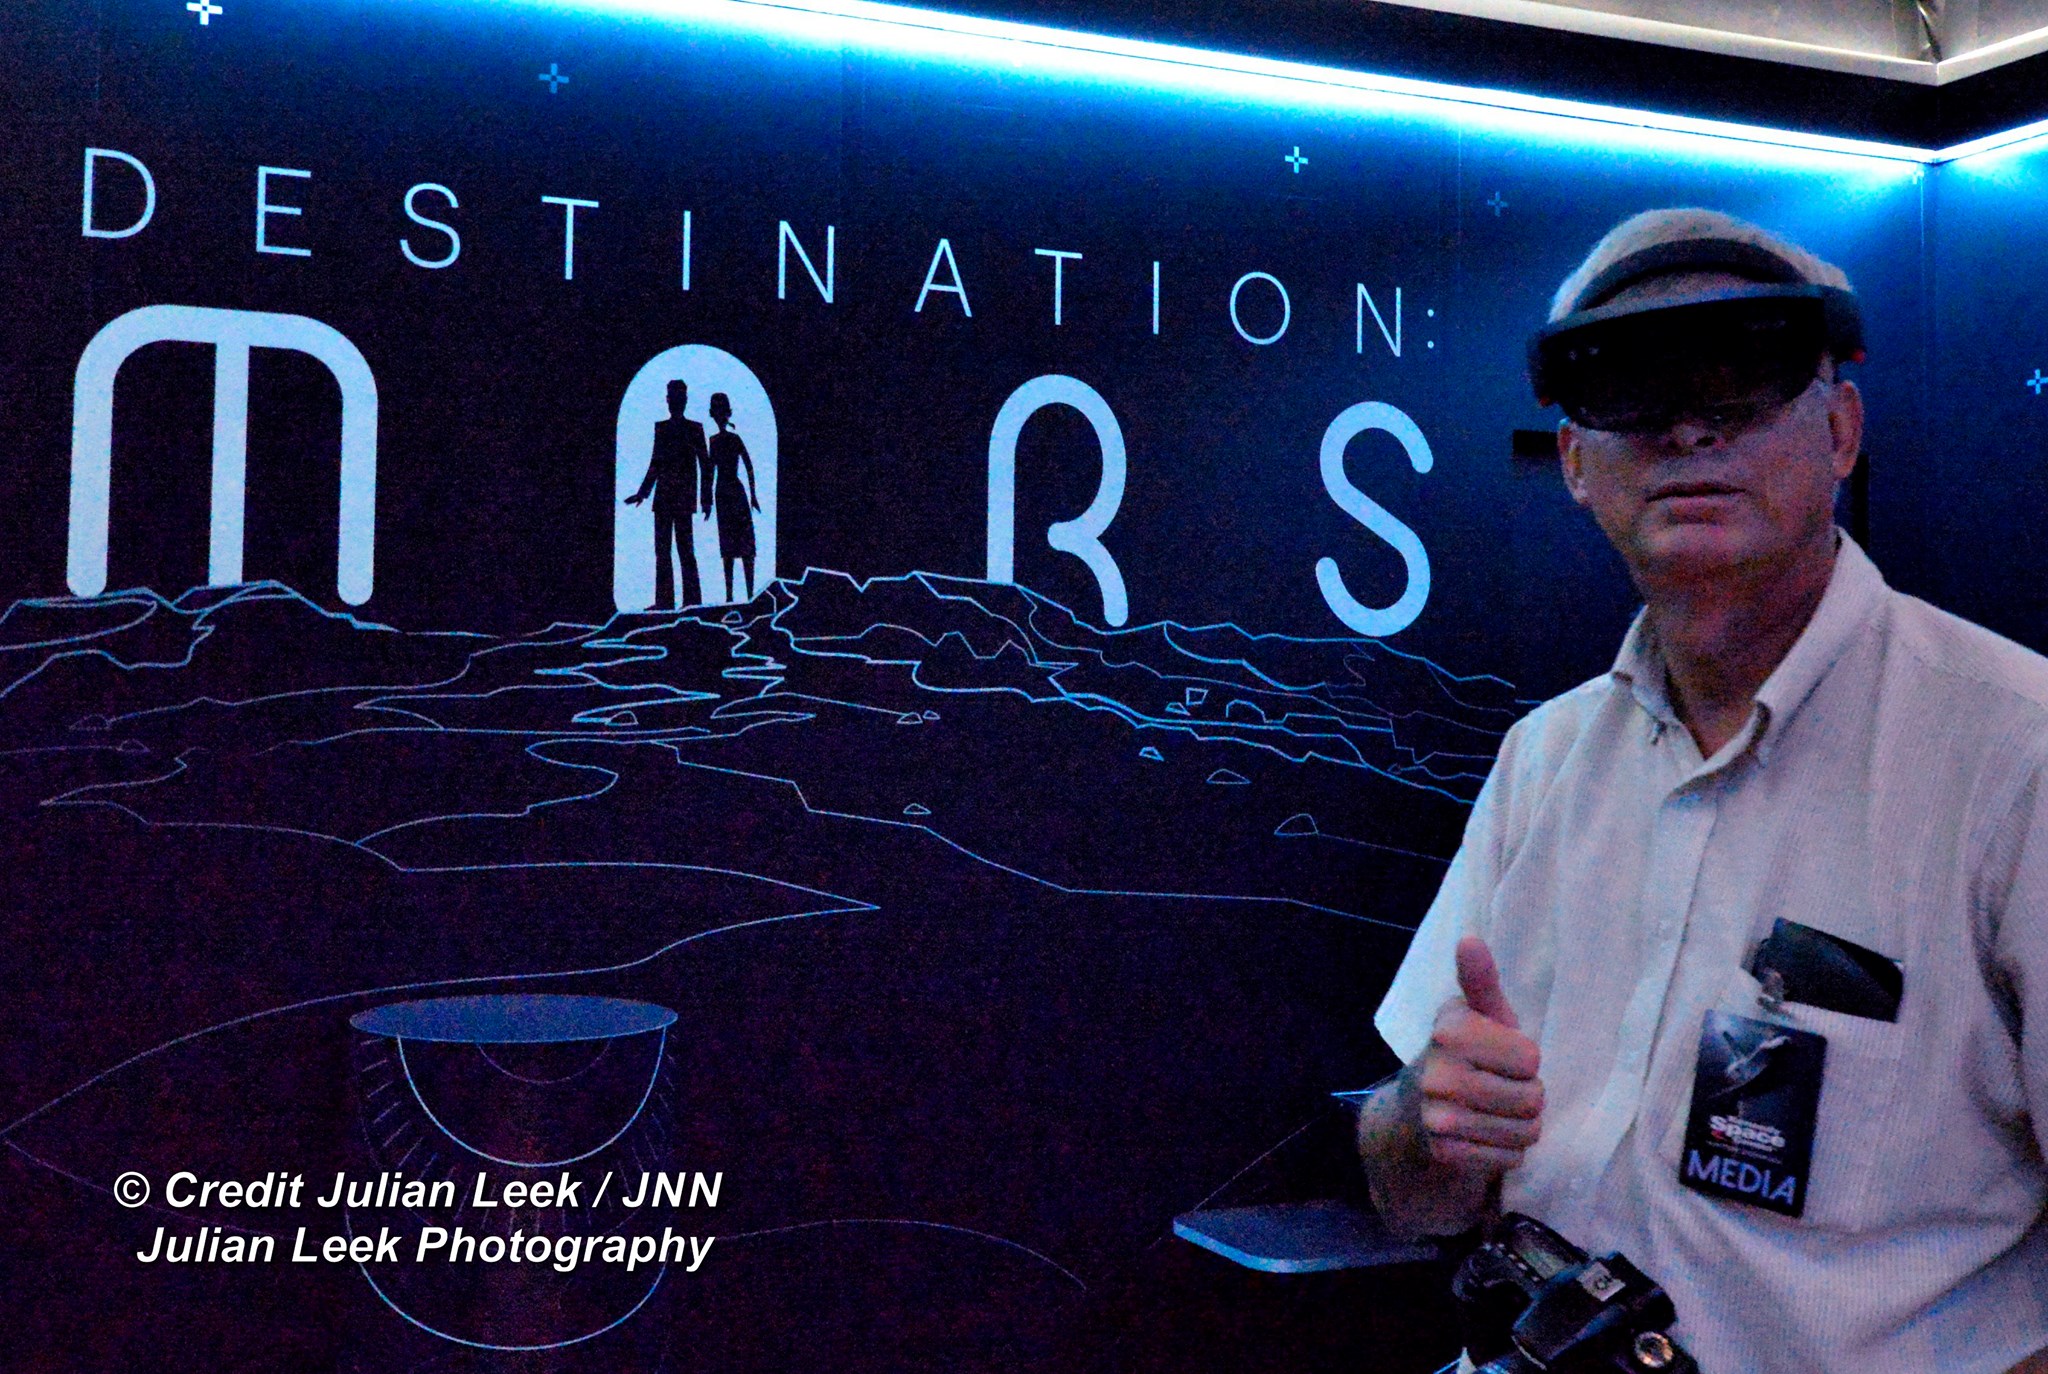 Inside the Destination Mars exhibit area, Ken Kremer of Universe Today is fitted with the Microsoft HoloLens gear. Credit Julian Leek 